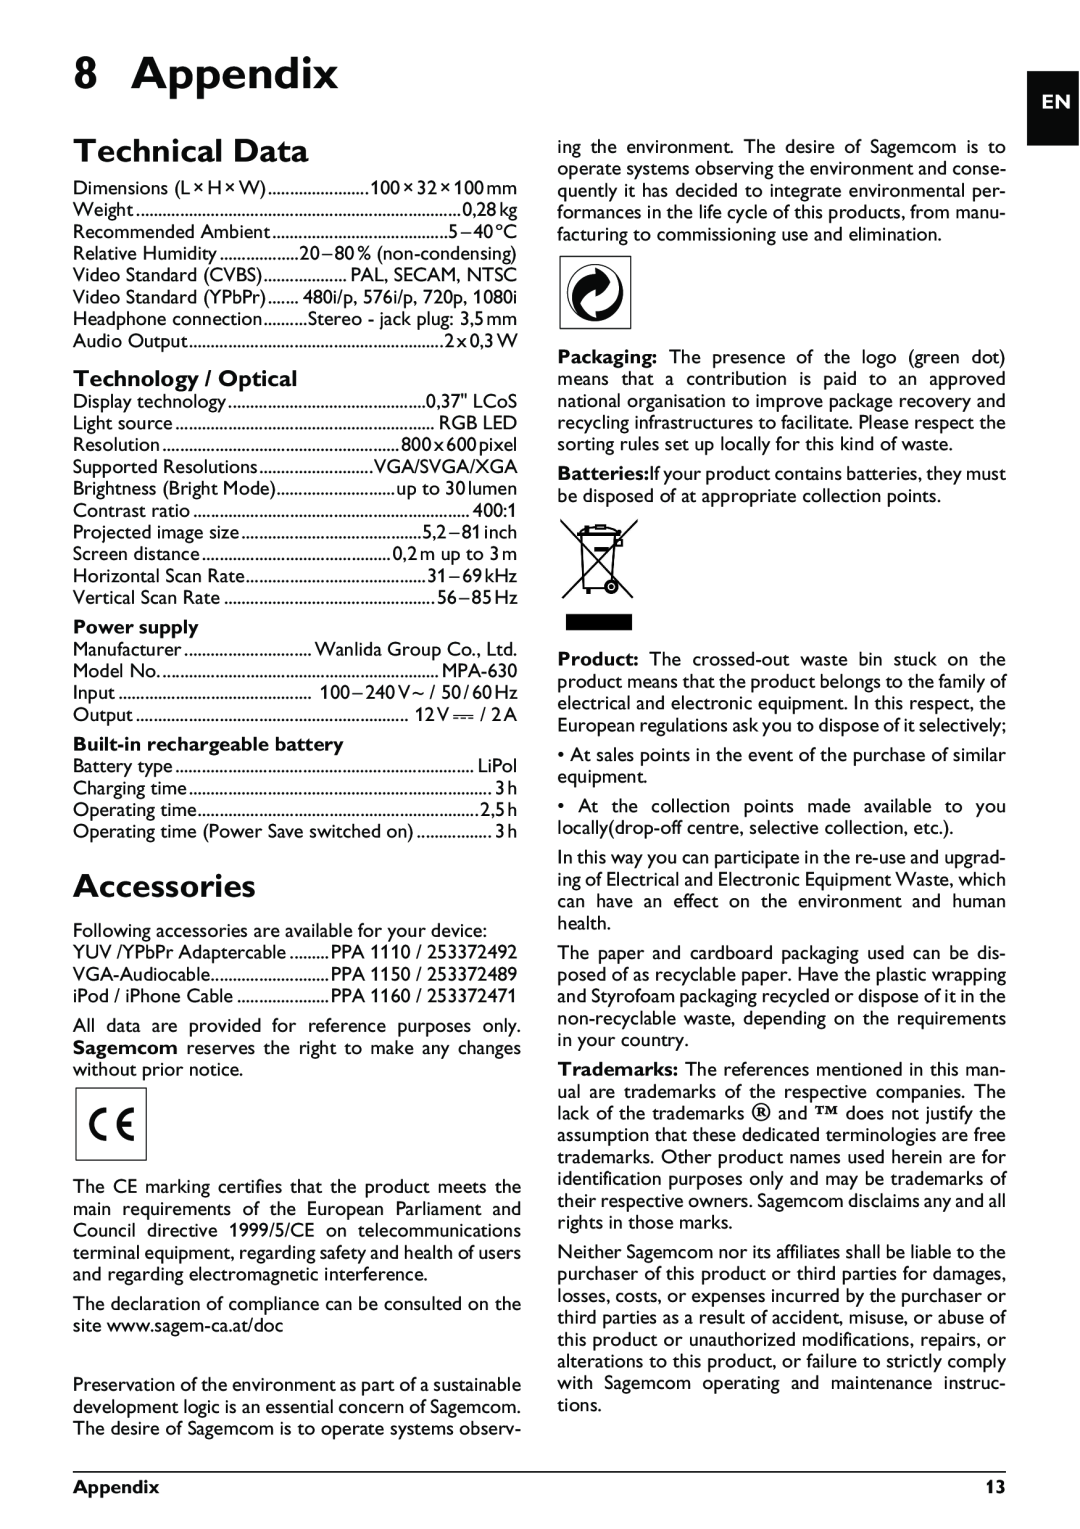 Philips PPX1230 user manual Appendix, Technical Data, Accessories, Power supply, Built-inrechargeable battery 